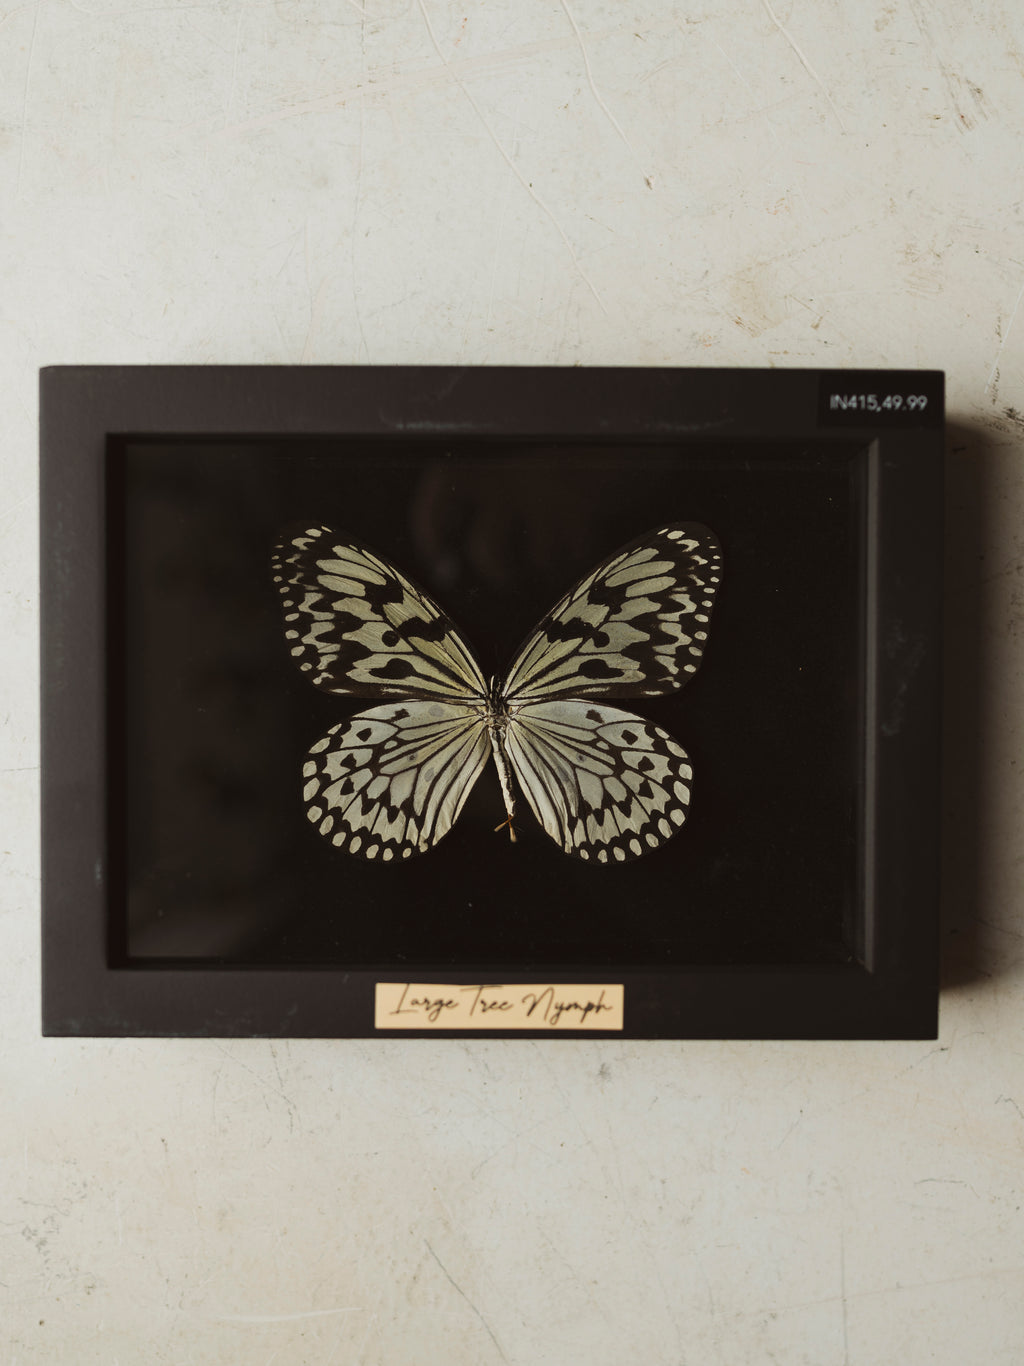 5.75" Framed Large Tree Nymph, IN415